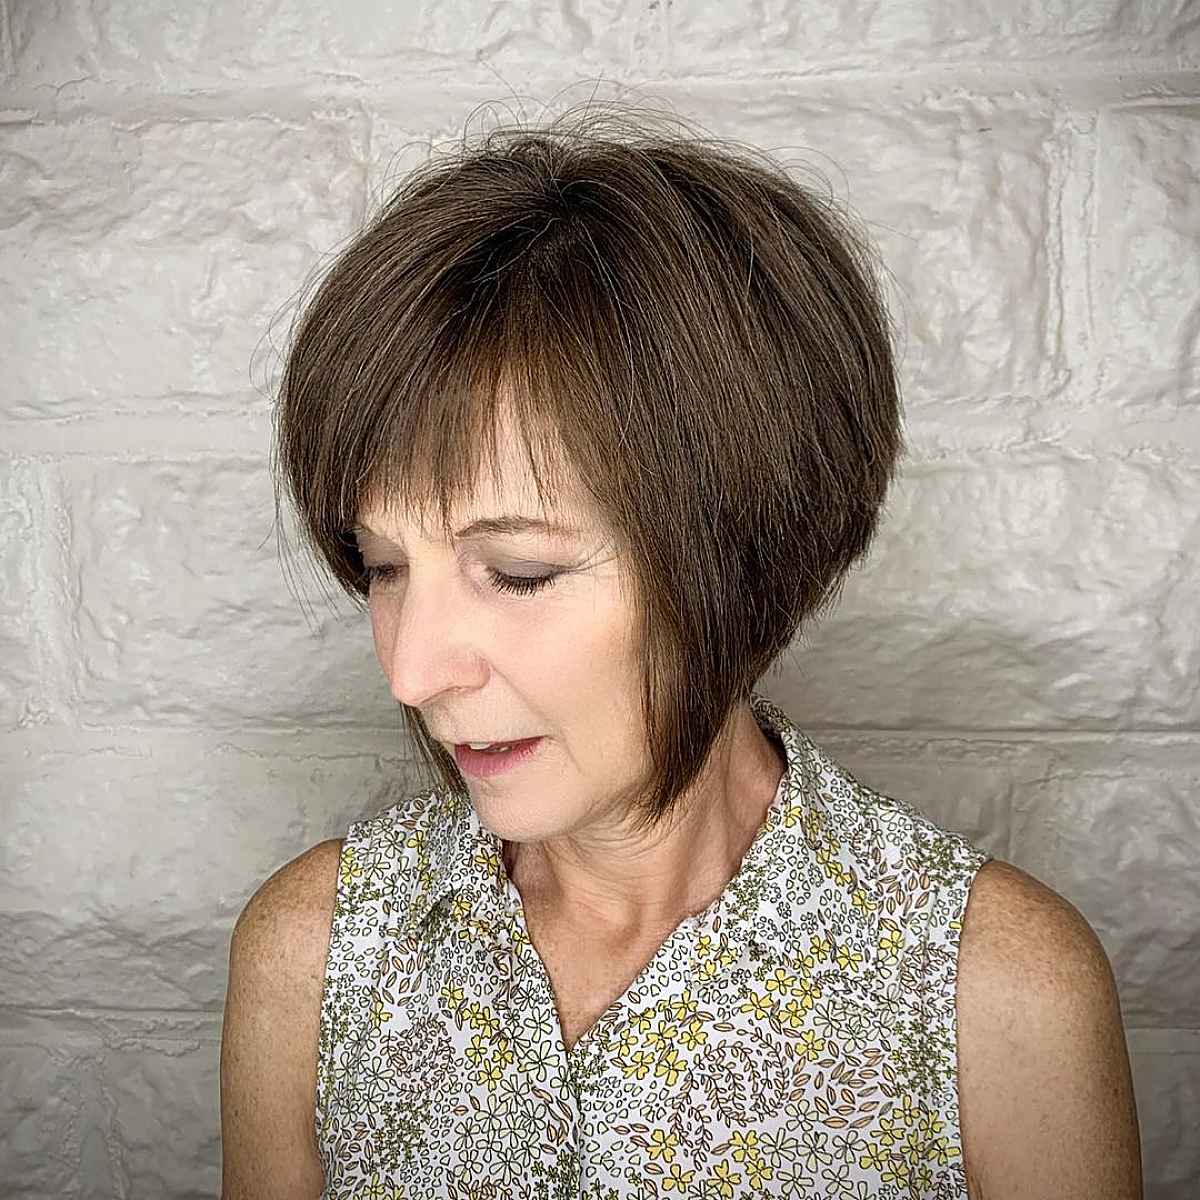 15 Angled Bobs for Women Over 60 Who Want a Chic Look